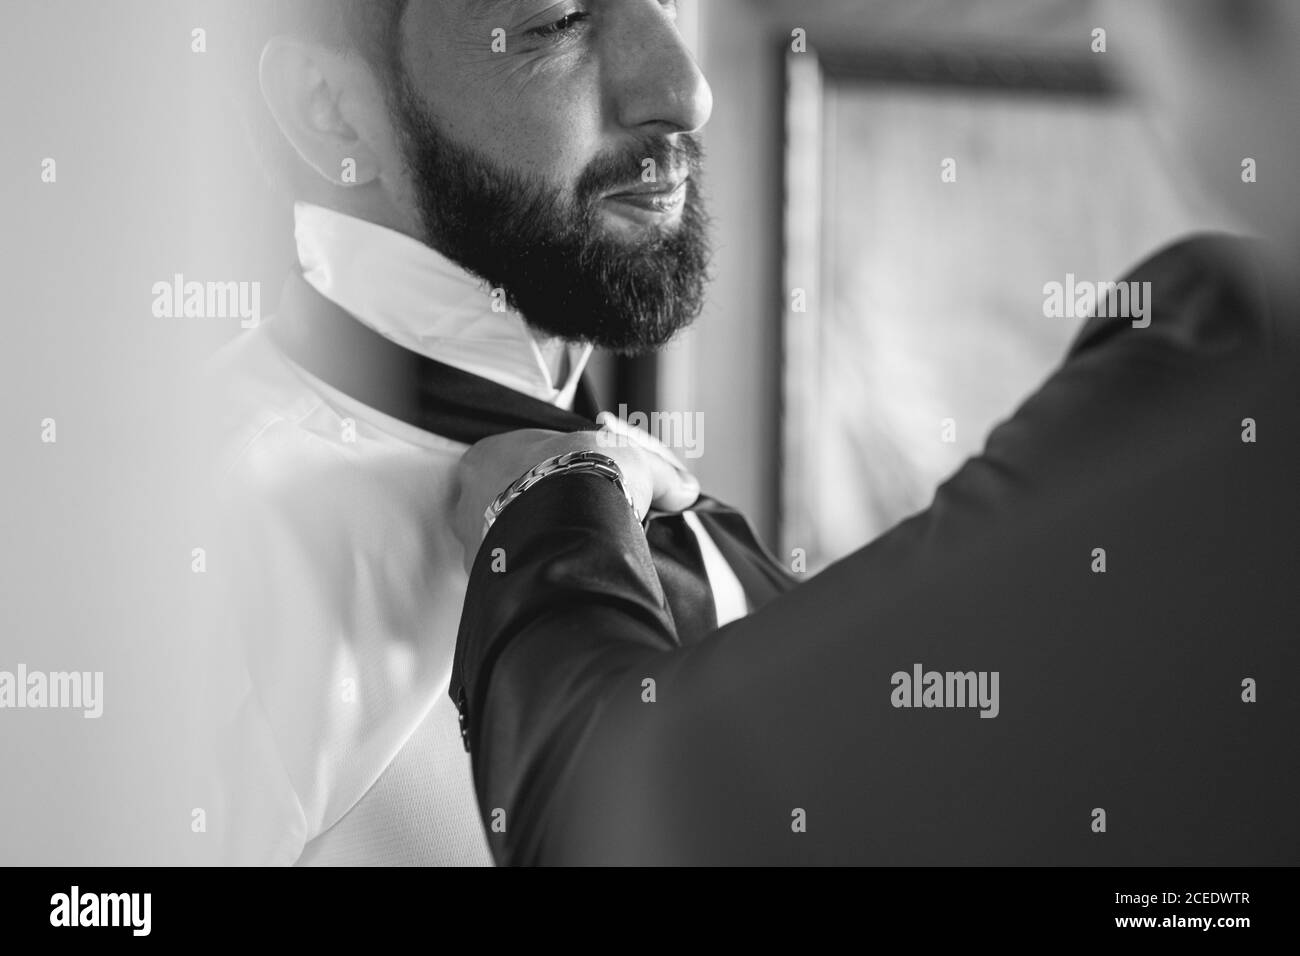 Crop view of person knotting black tie for young handsome man with beard in white shirt in black and white colors Stock Photo